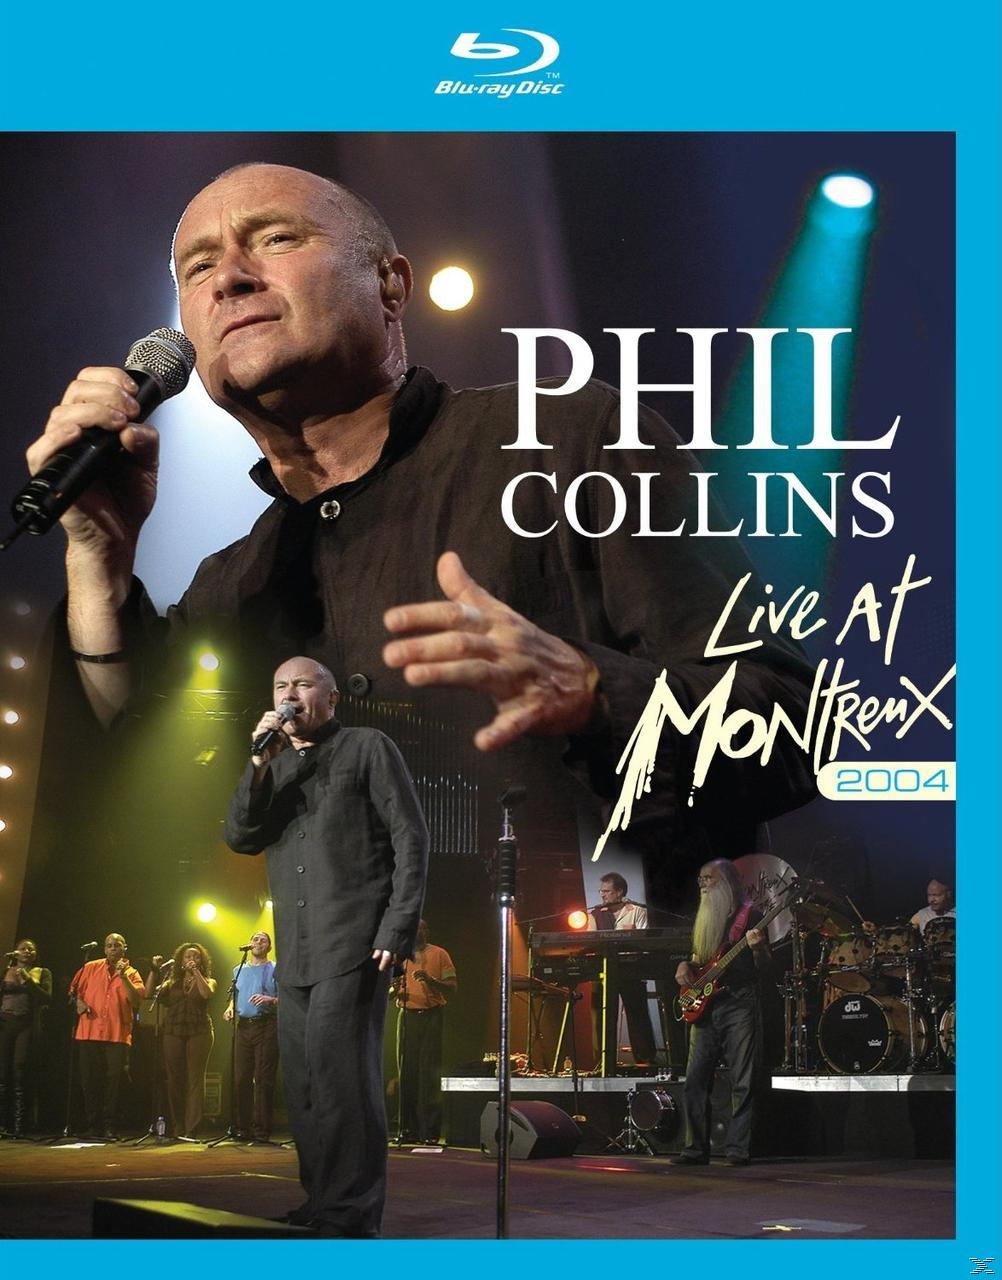 Phil - 2004 (Bluray) Collins Live At (Blu-ray) - Montreux